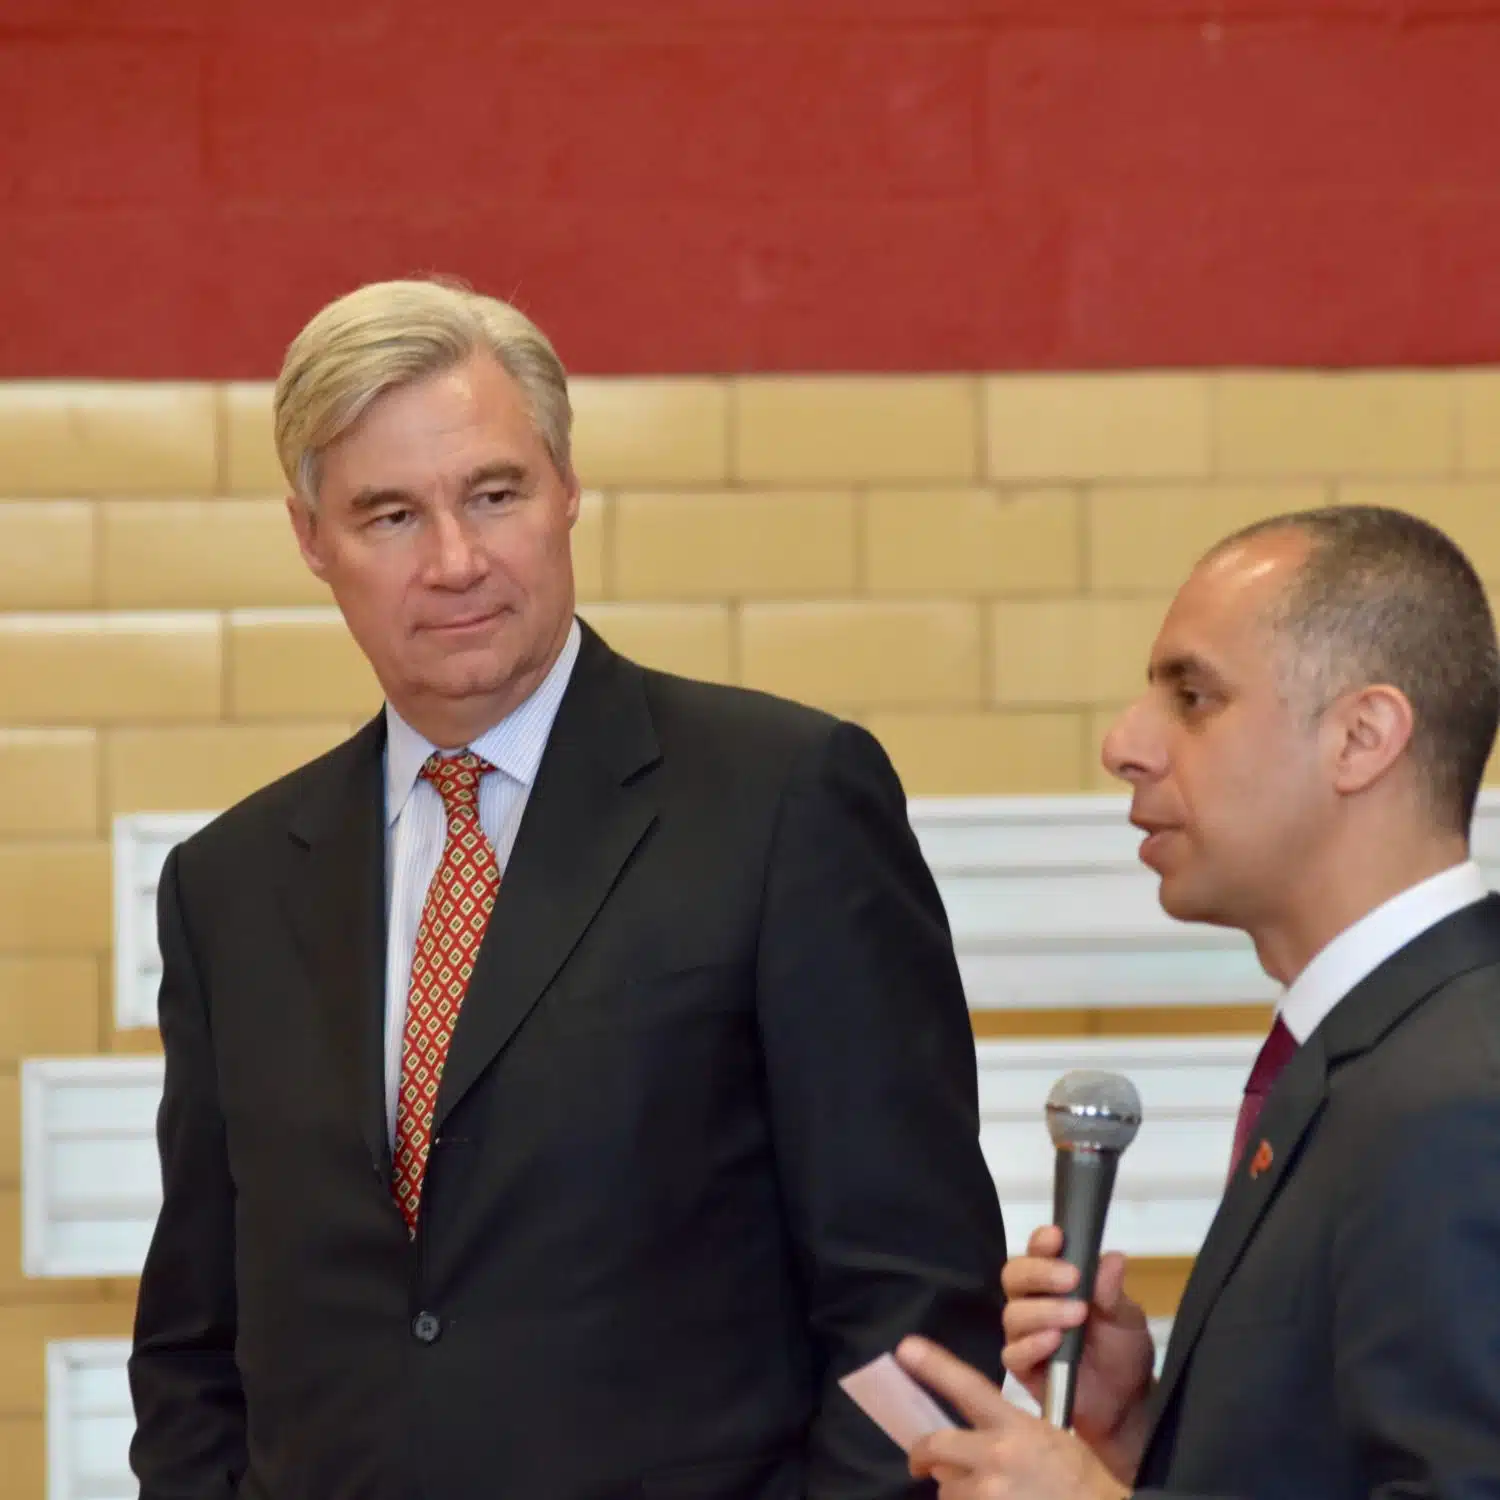 Senator Whitehouse and Mayor Elorza take questions in Providence